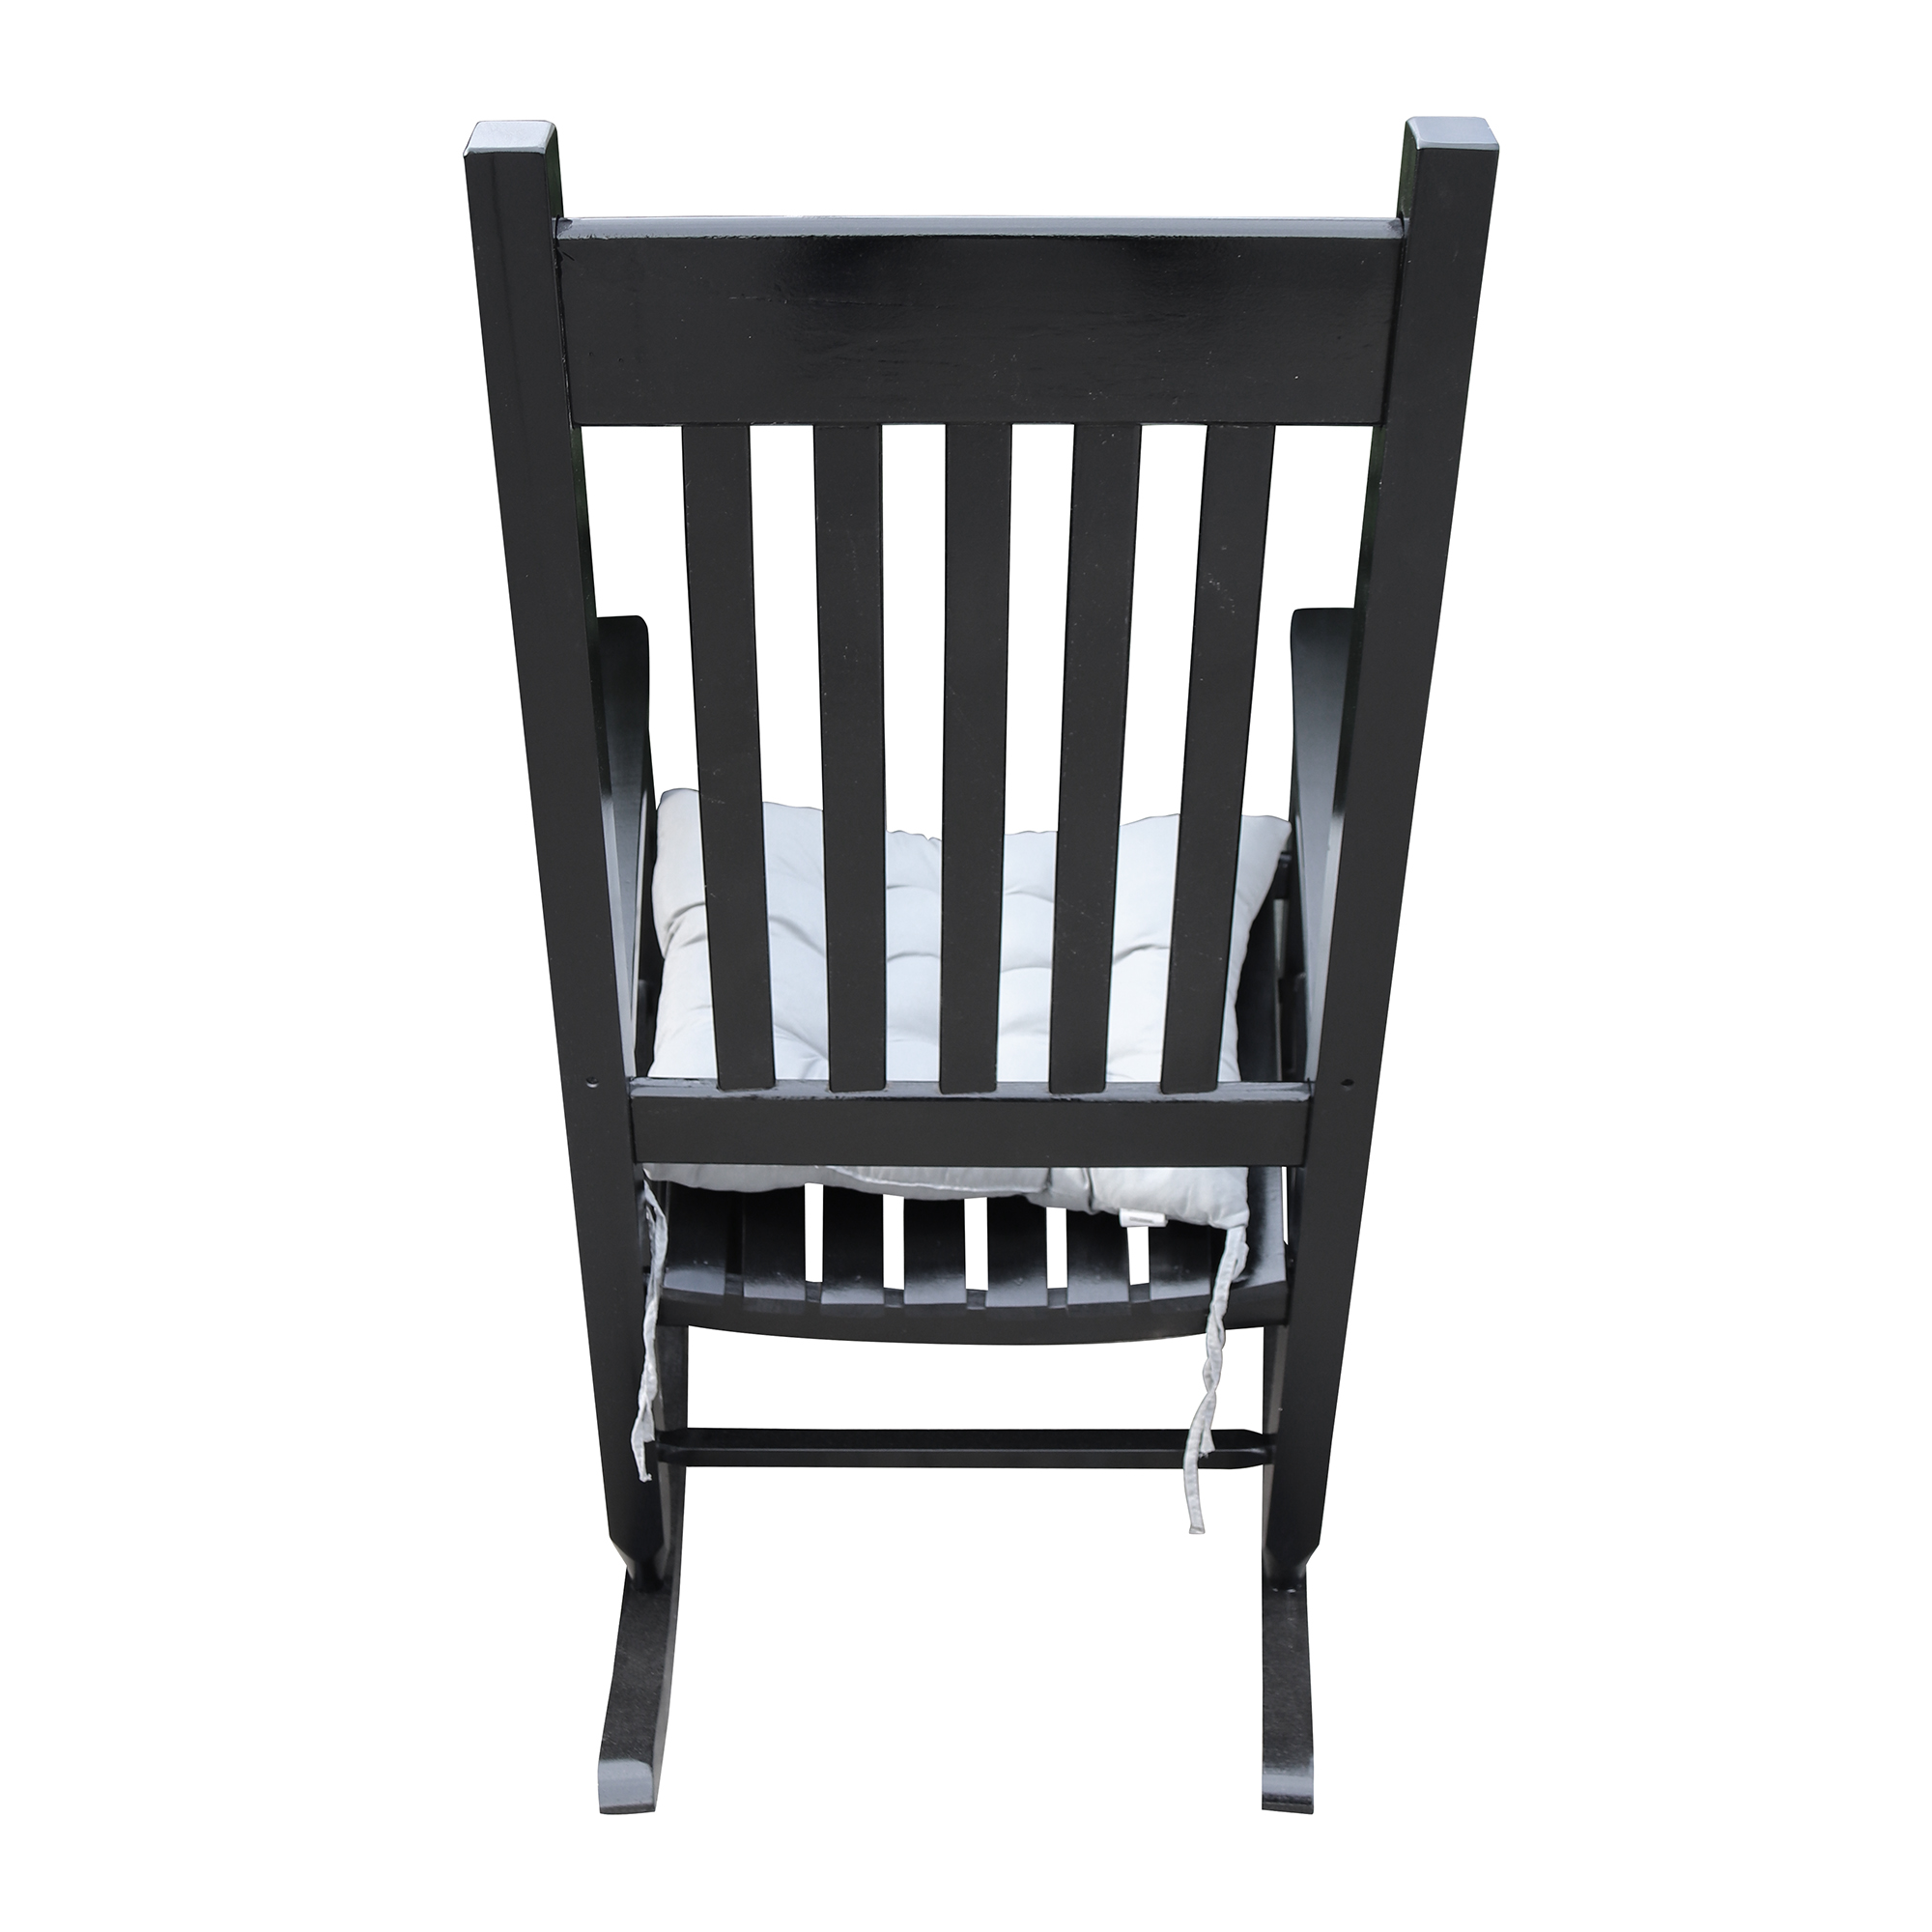 Nine Bull Wooden Porch Rocker Chair, Rocking Lounge Chair for Patio Balcony Yard, Black - image 4 of 5